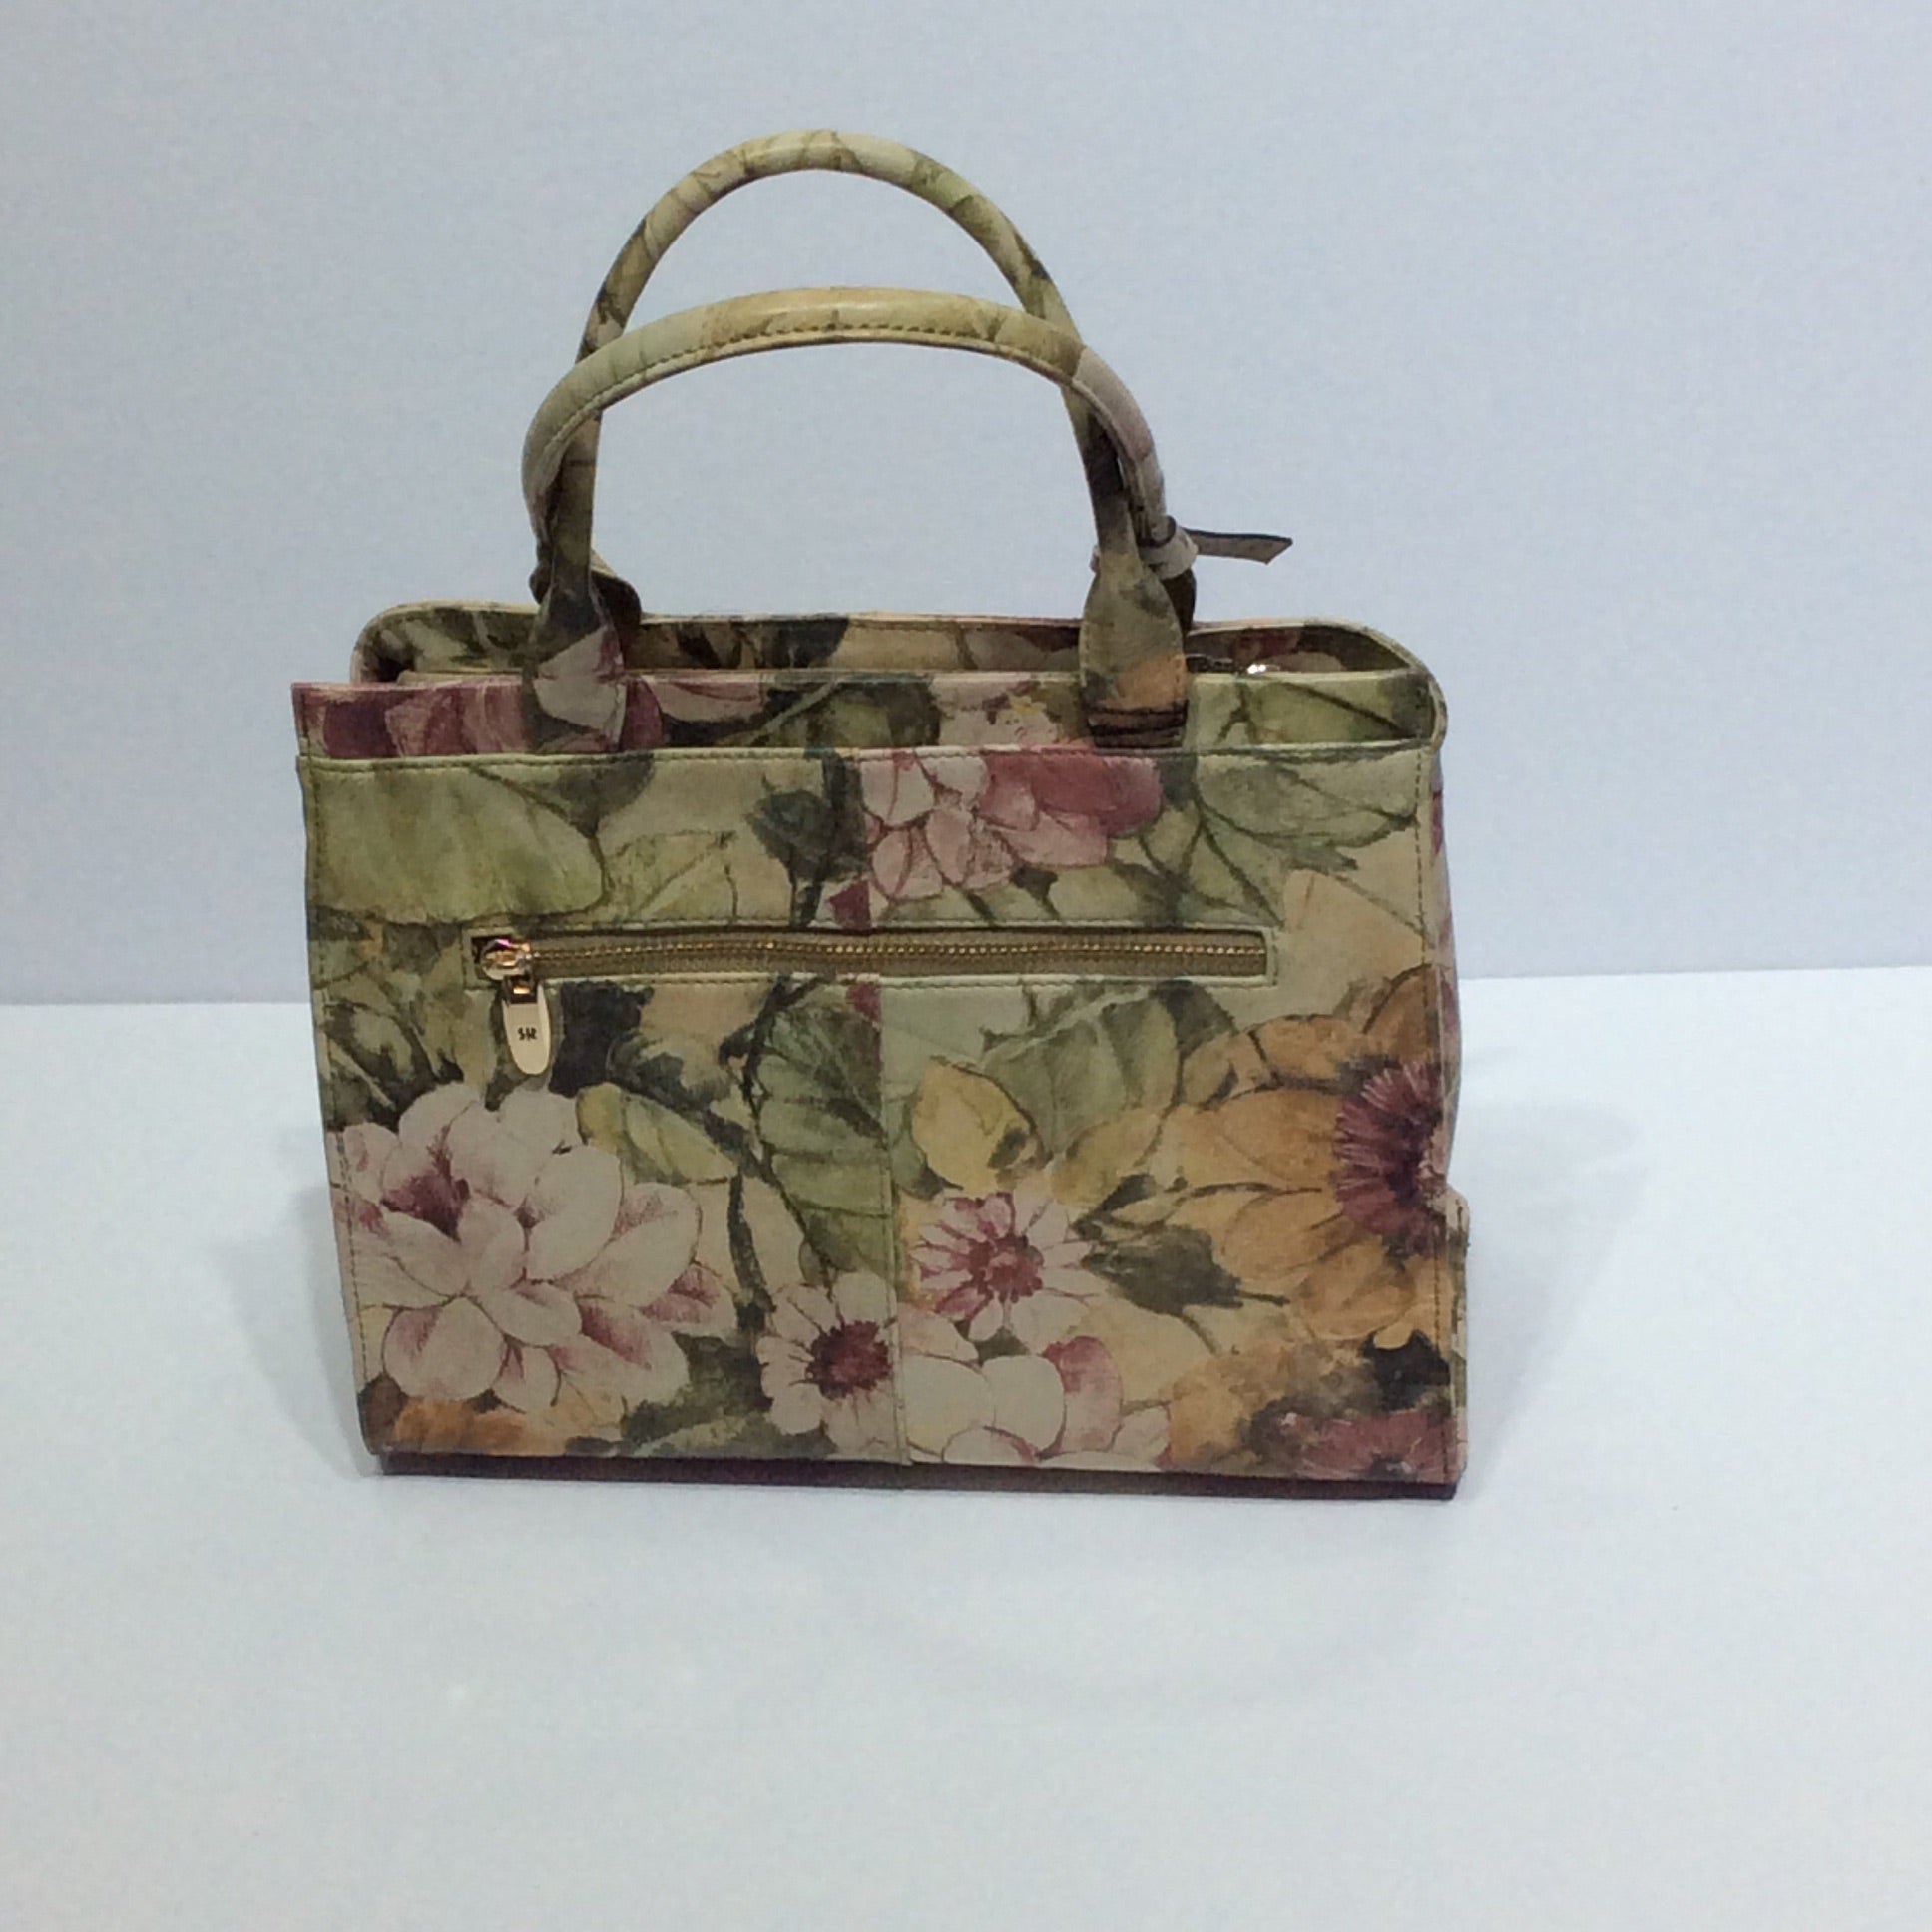 Floral pattern Italian leather purse – DiJore